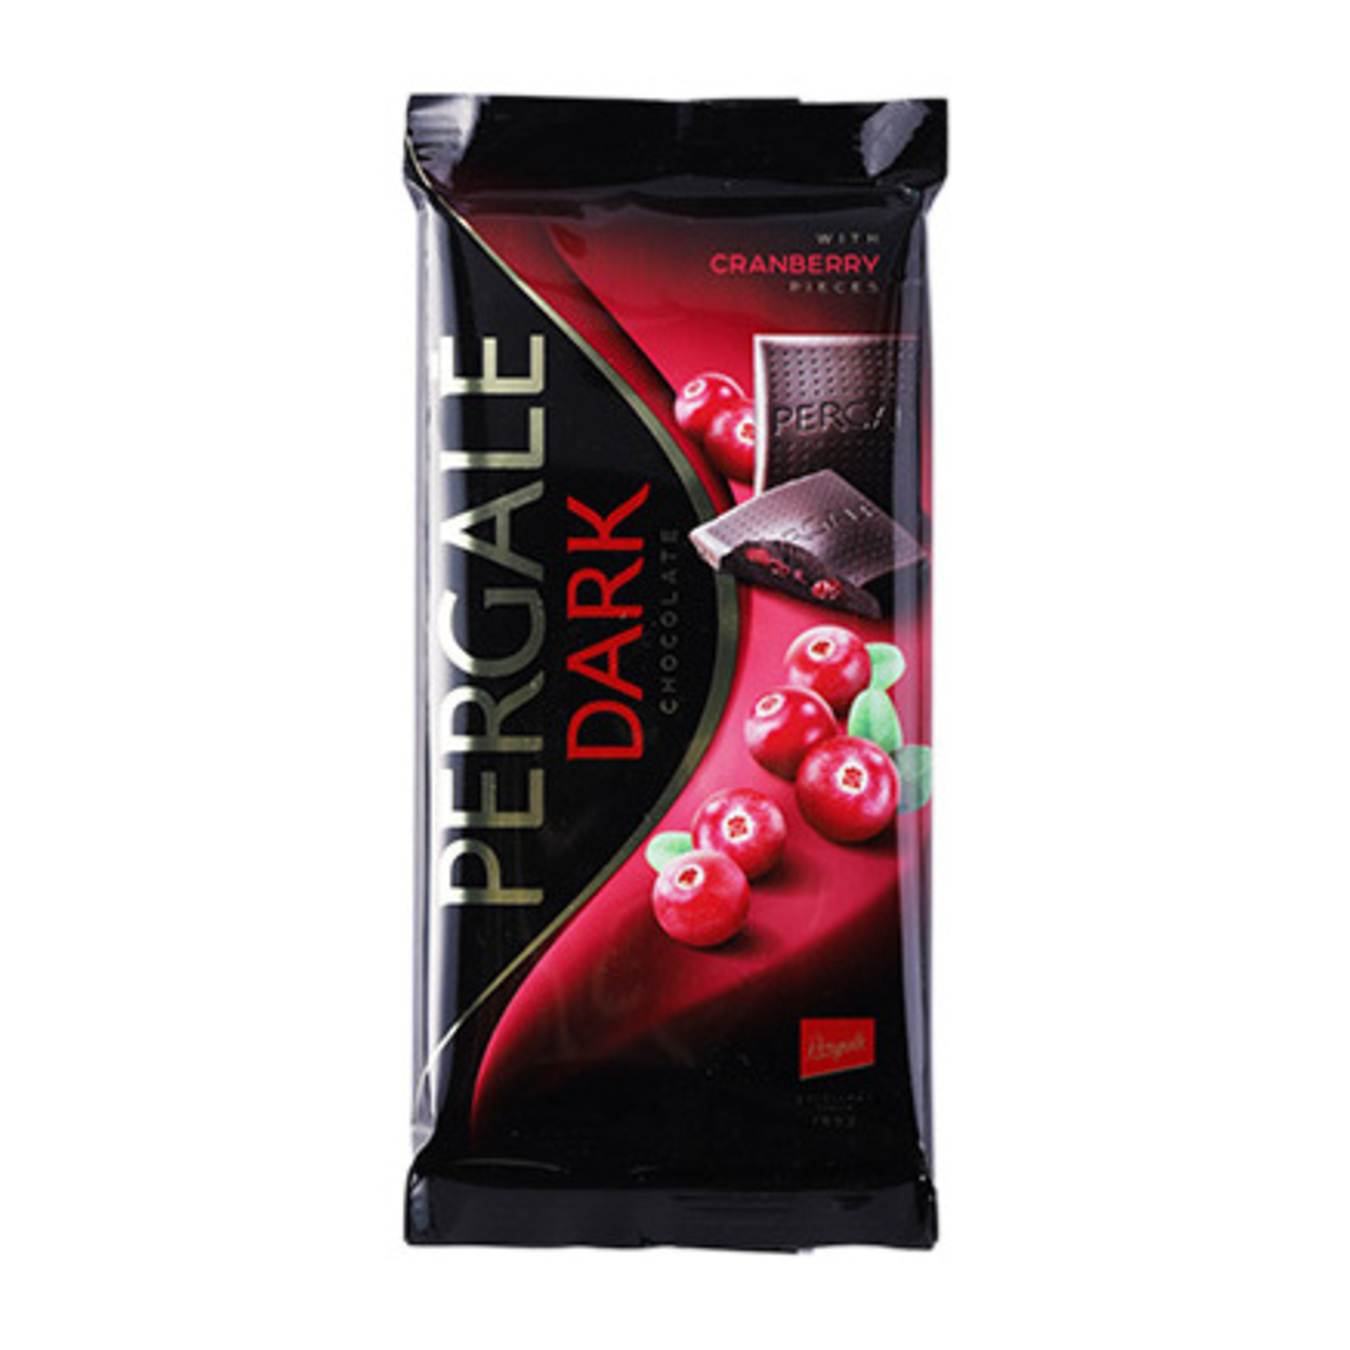 Black Chocolate Pergale with Cranberry Pieces 93g